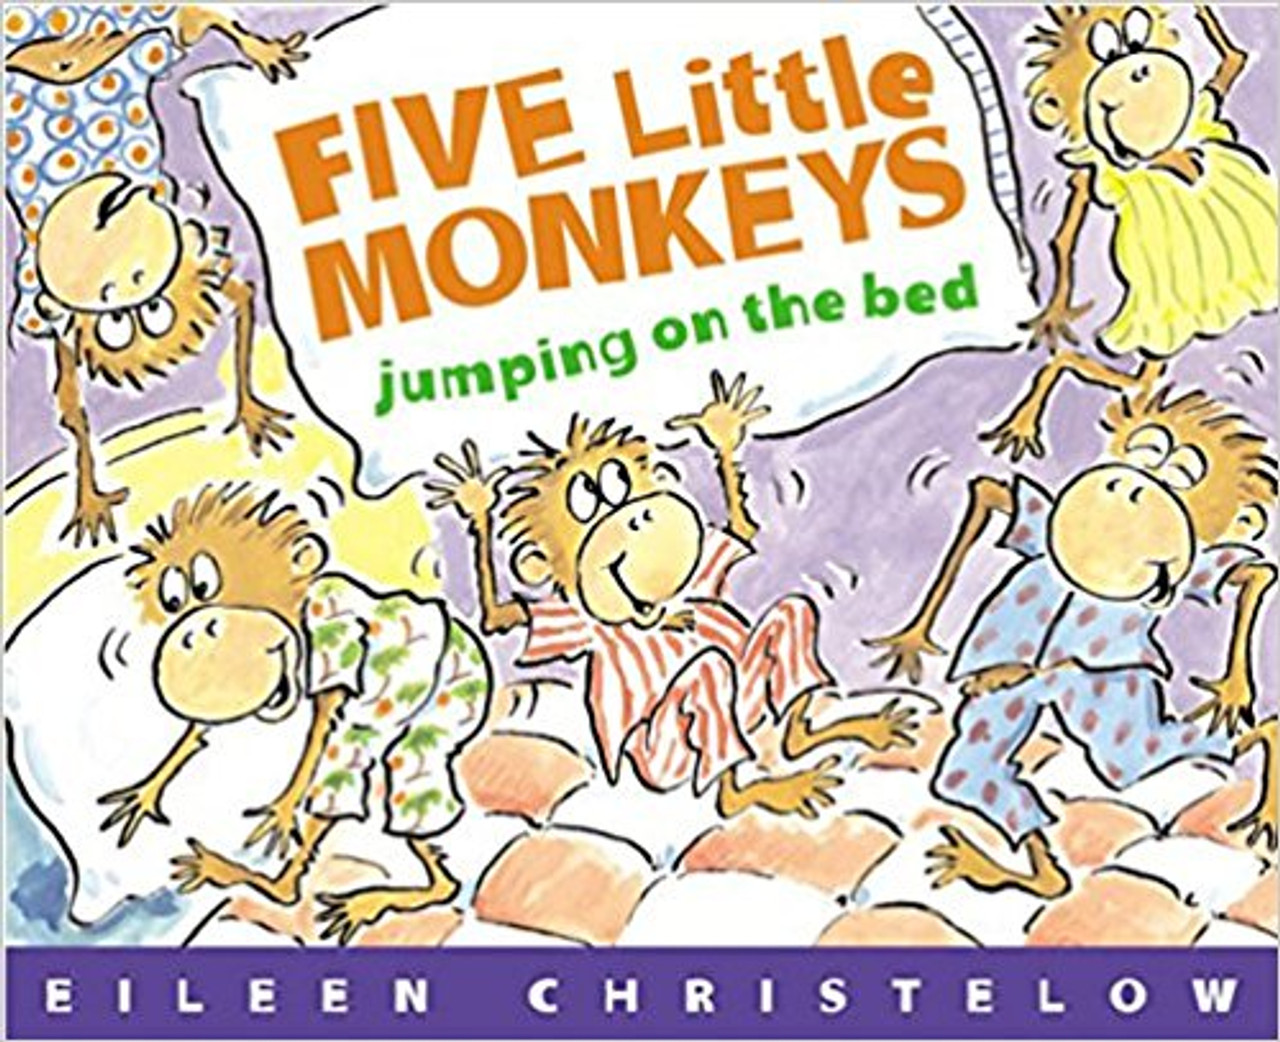 Five Little Monkeys Jumping on the Bed (Big Edition) by Eileen Christelow